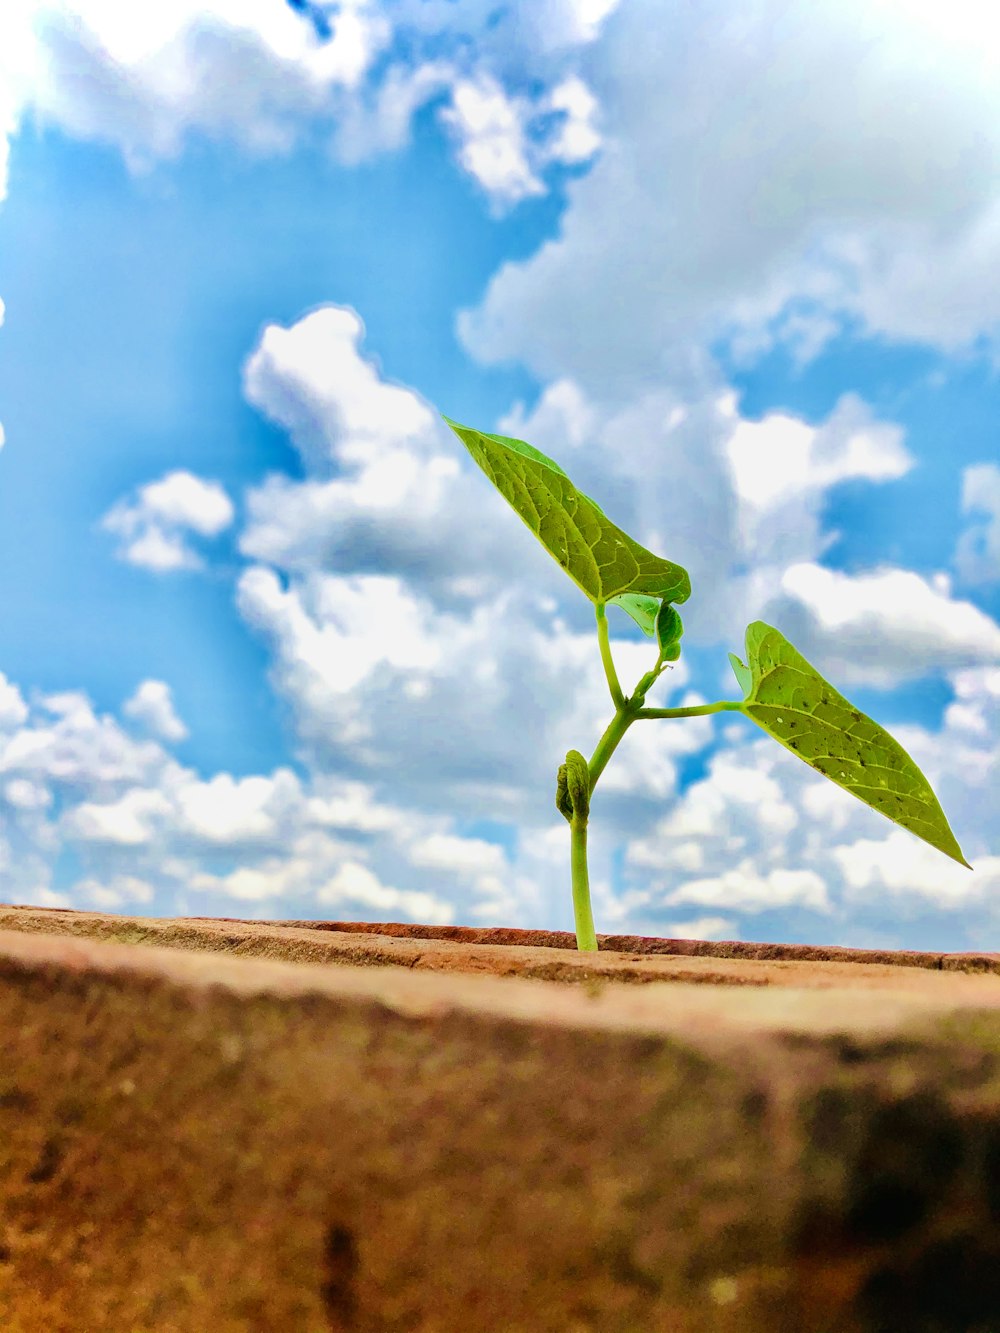 green plant on brown soil under blue sky and white clouds during daytime